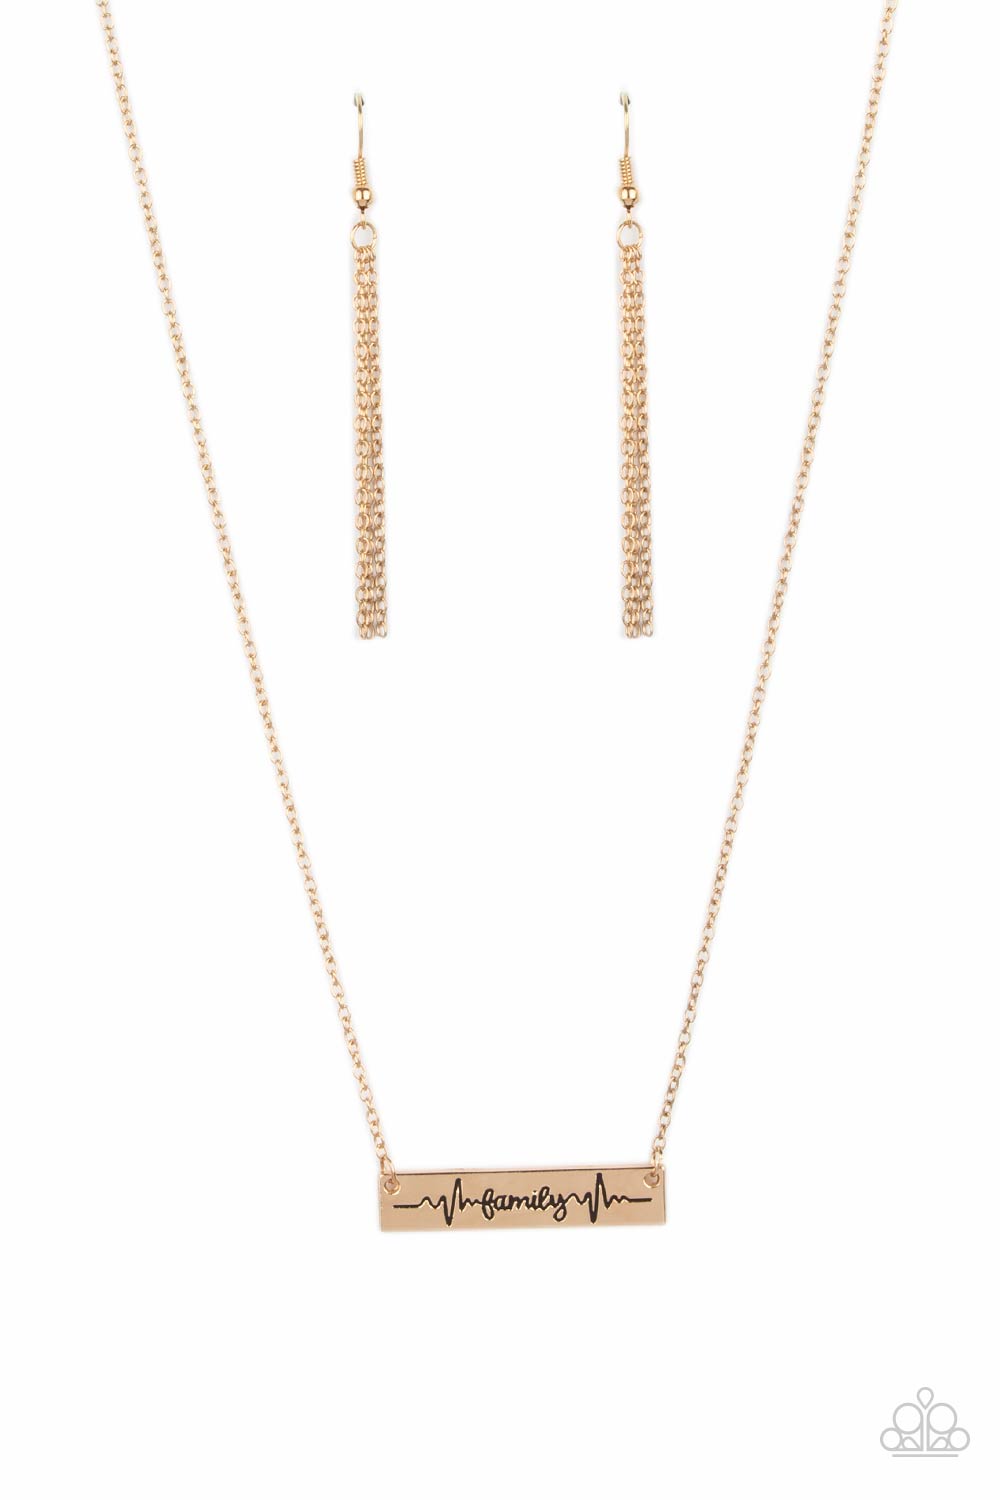 Paparazzi Necklace - Living The Mom Life - Gold